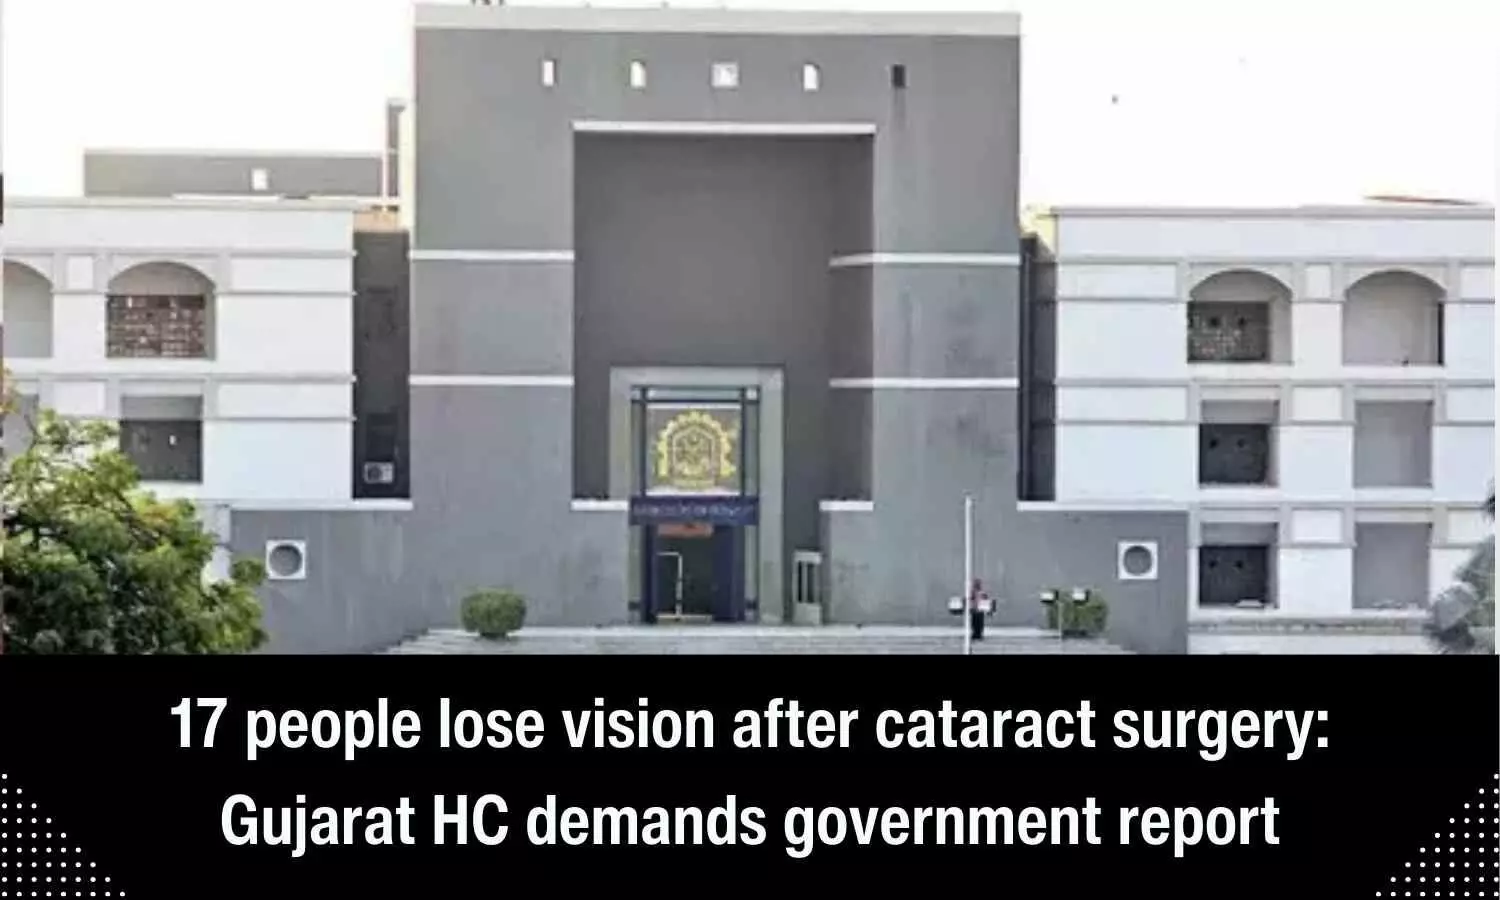 Vision loss of 17 persons after cataract surgery at Ahmedabad hospital, Gujarat HC seeks Govt report